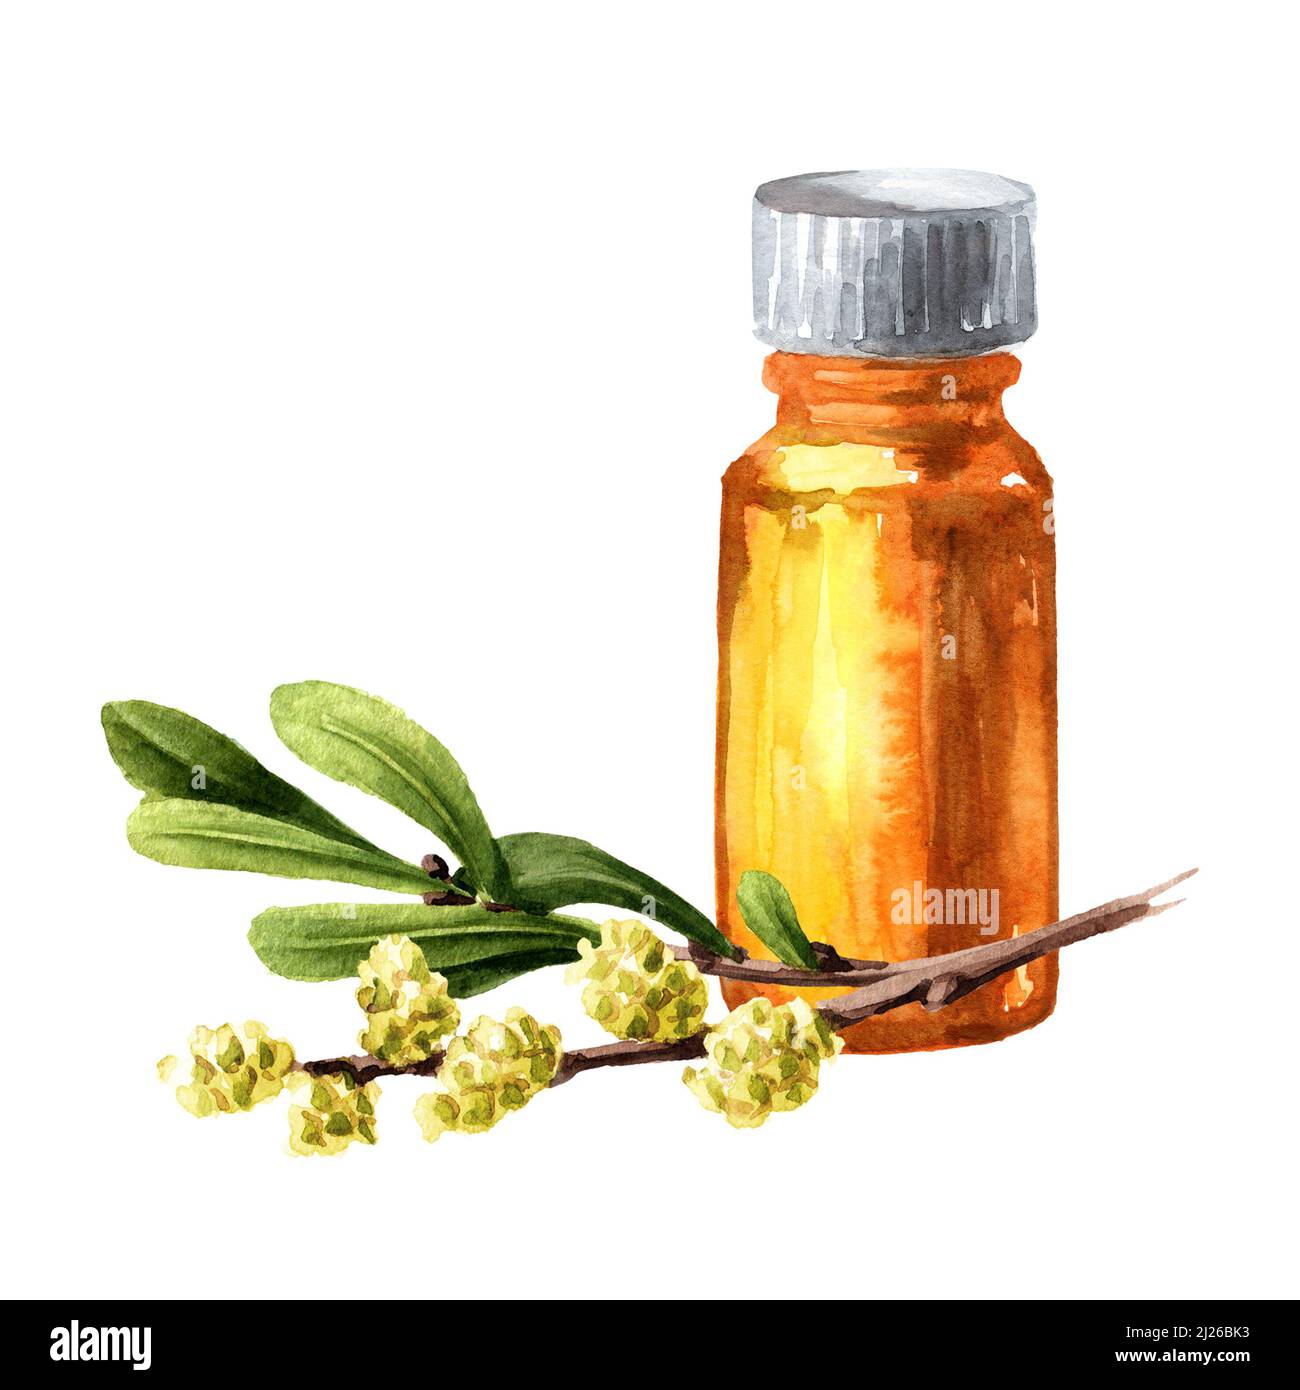 Bog myrtle essential oil, medicinal plant . Hand drawn watercolor illustration, isolated on white background Stock Photo